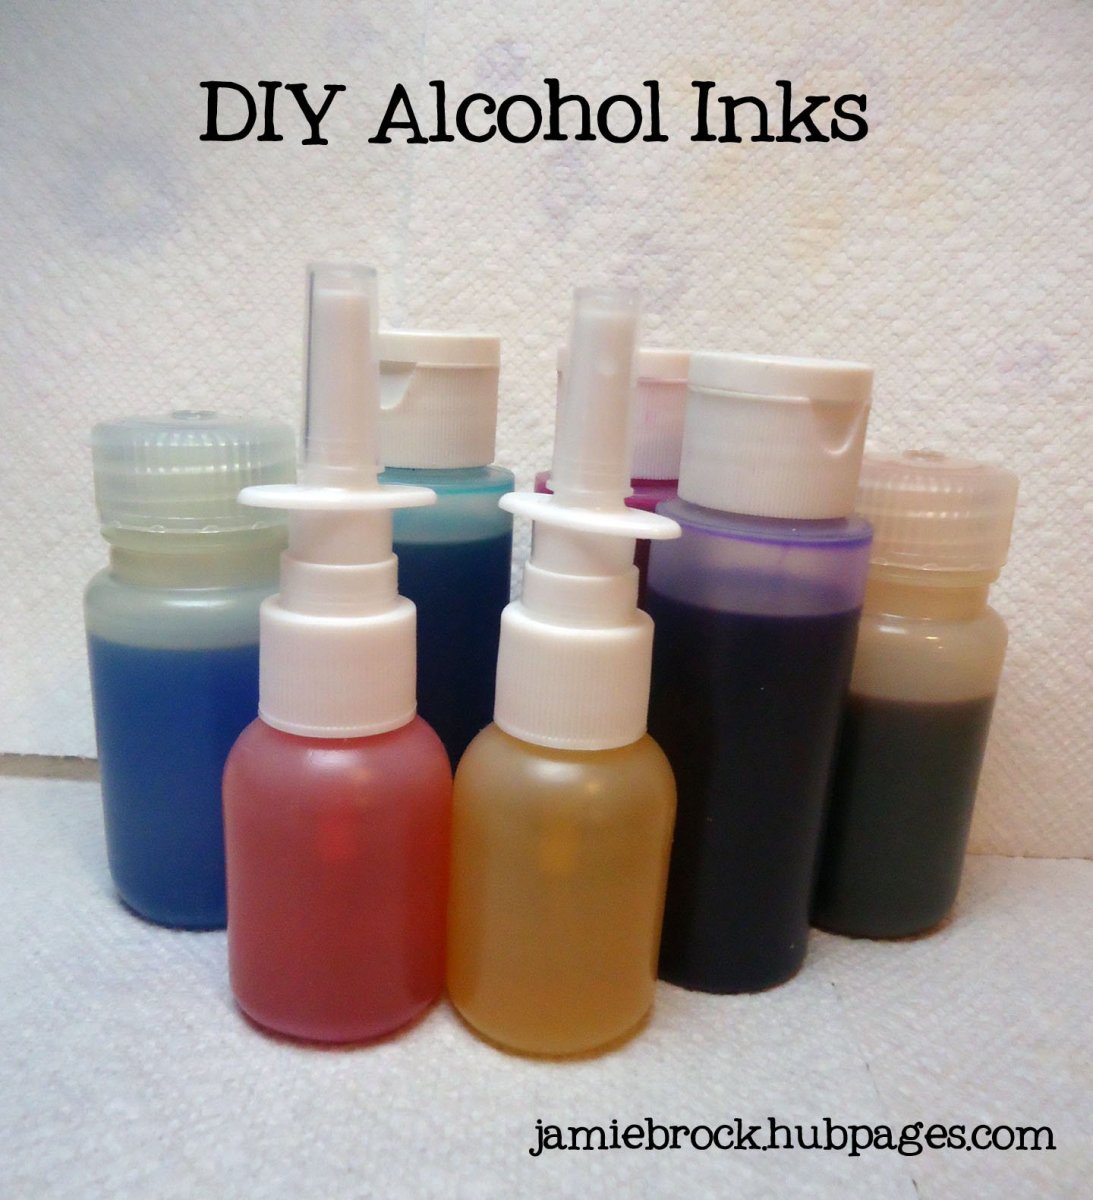 Learn how to make your own alcohol ink with this easy DIY tutorial.